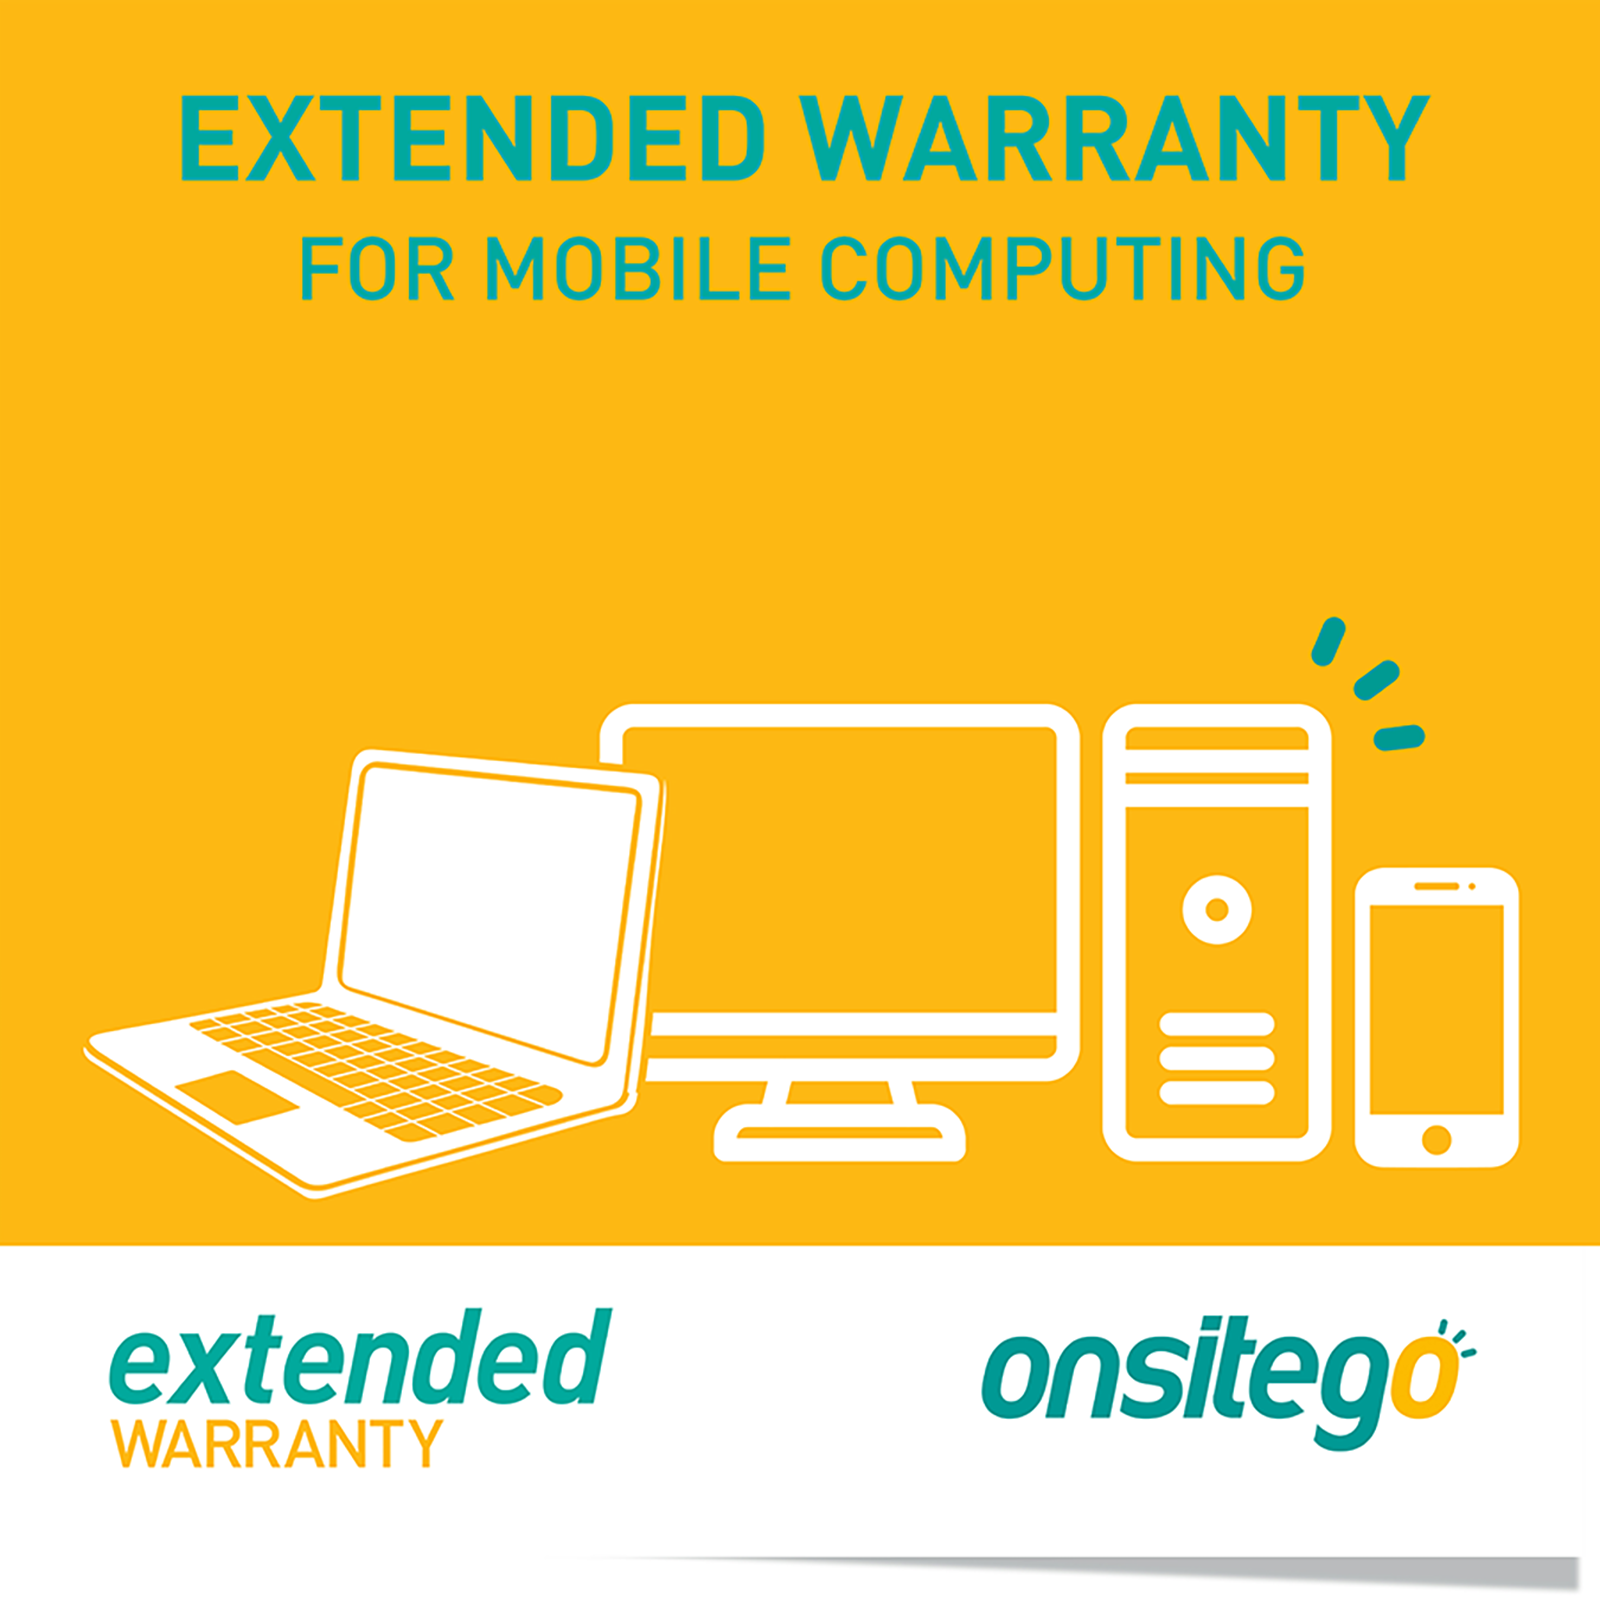 Onsitego 2 Year Extended Warranty for Laptop (Rs.450,000 - Rs.500,000)_1